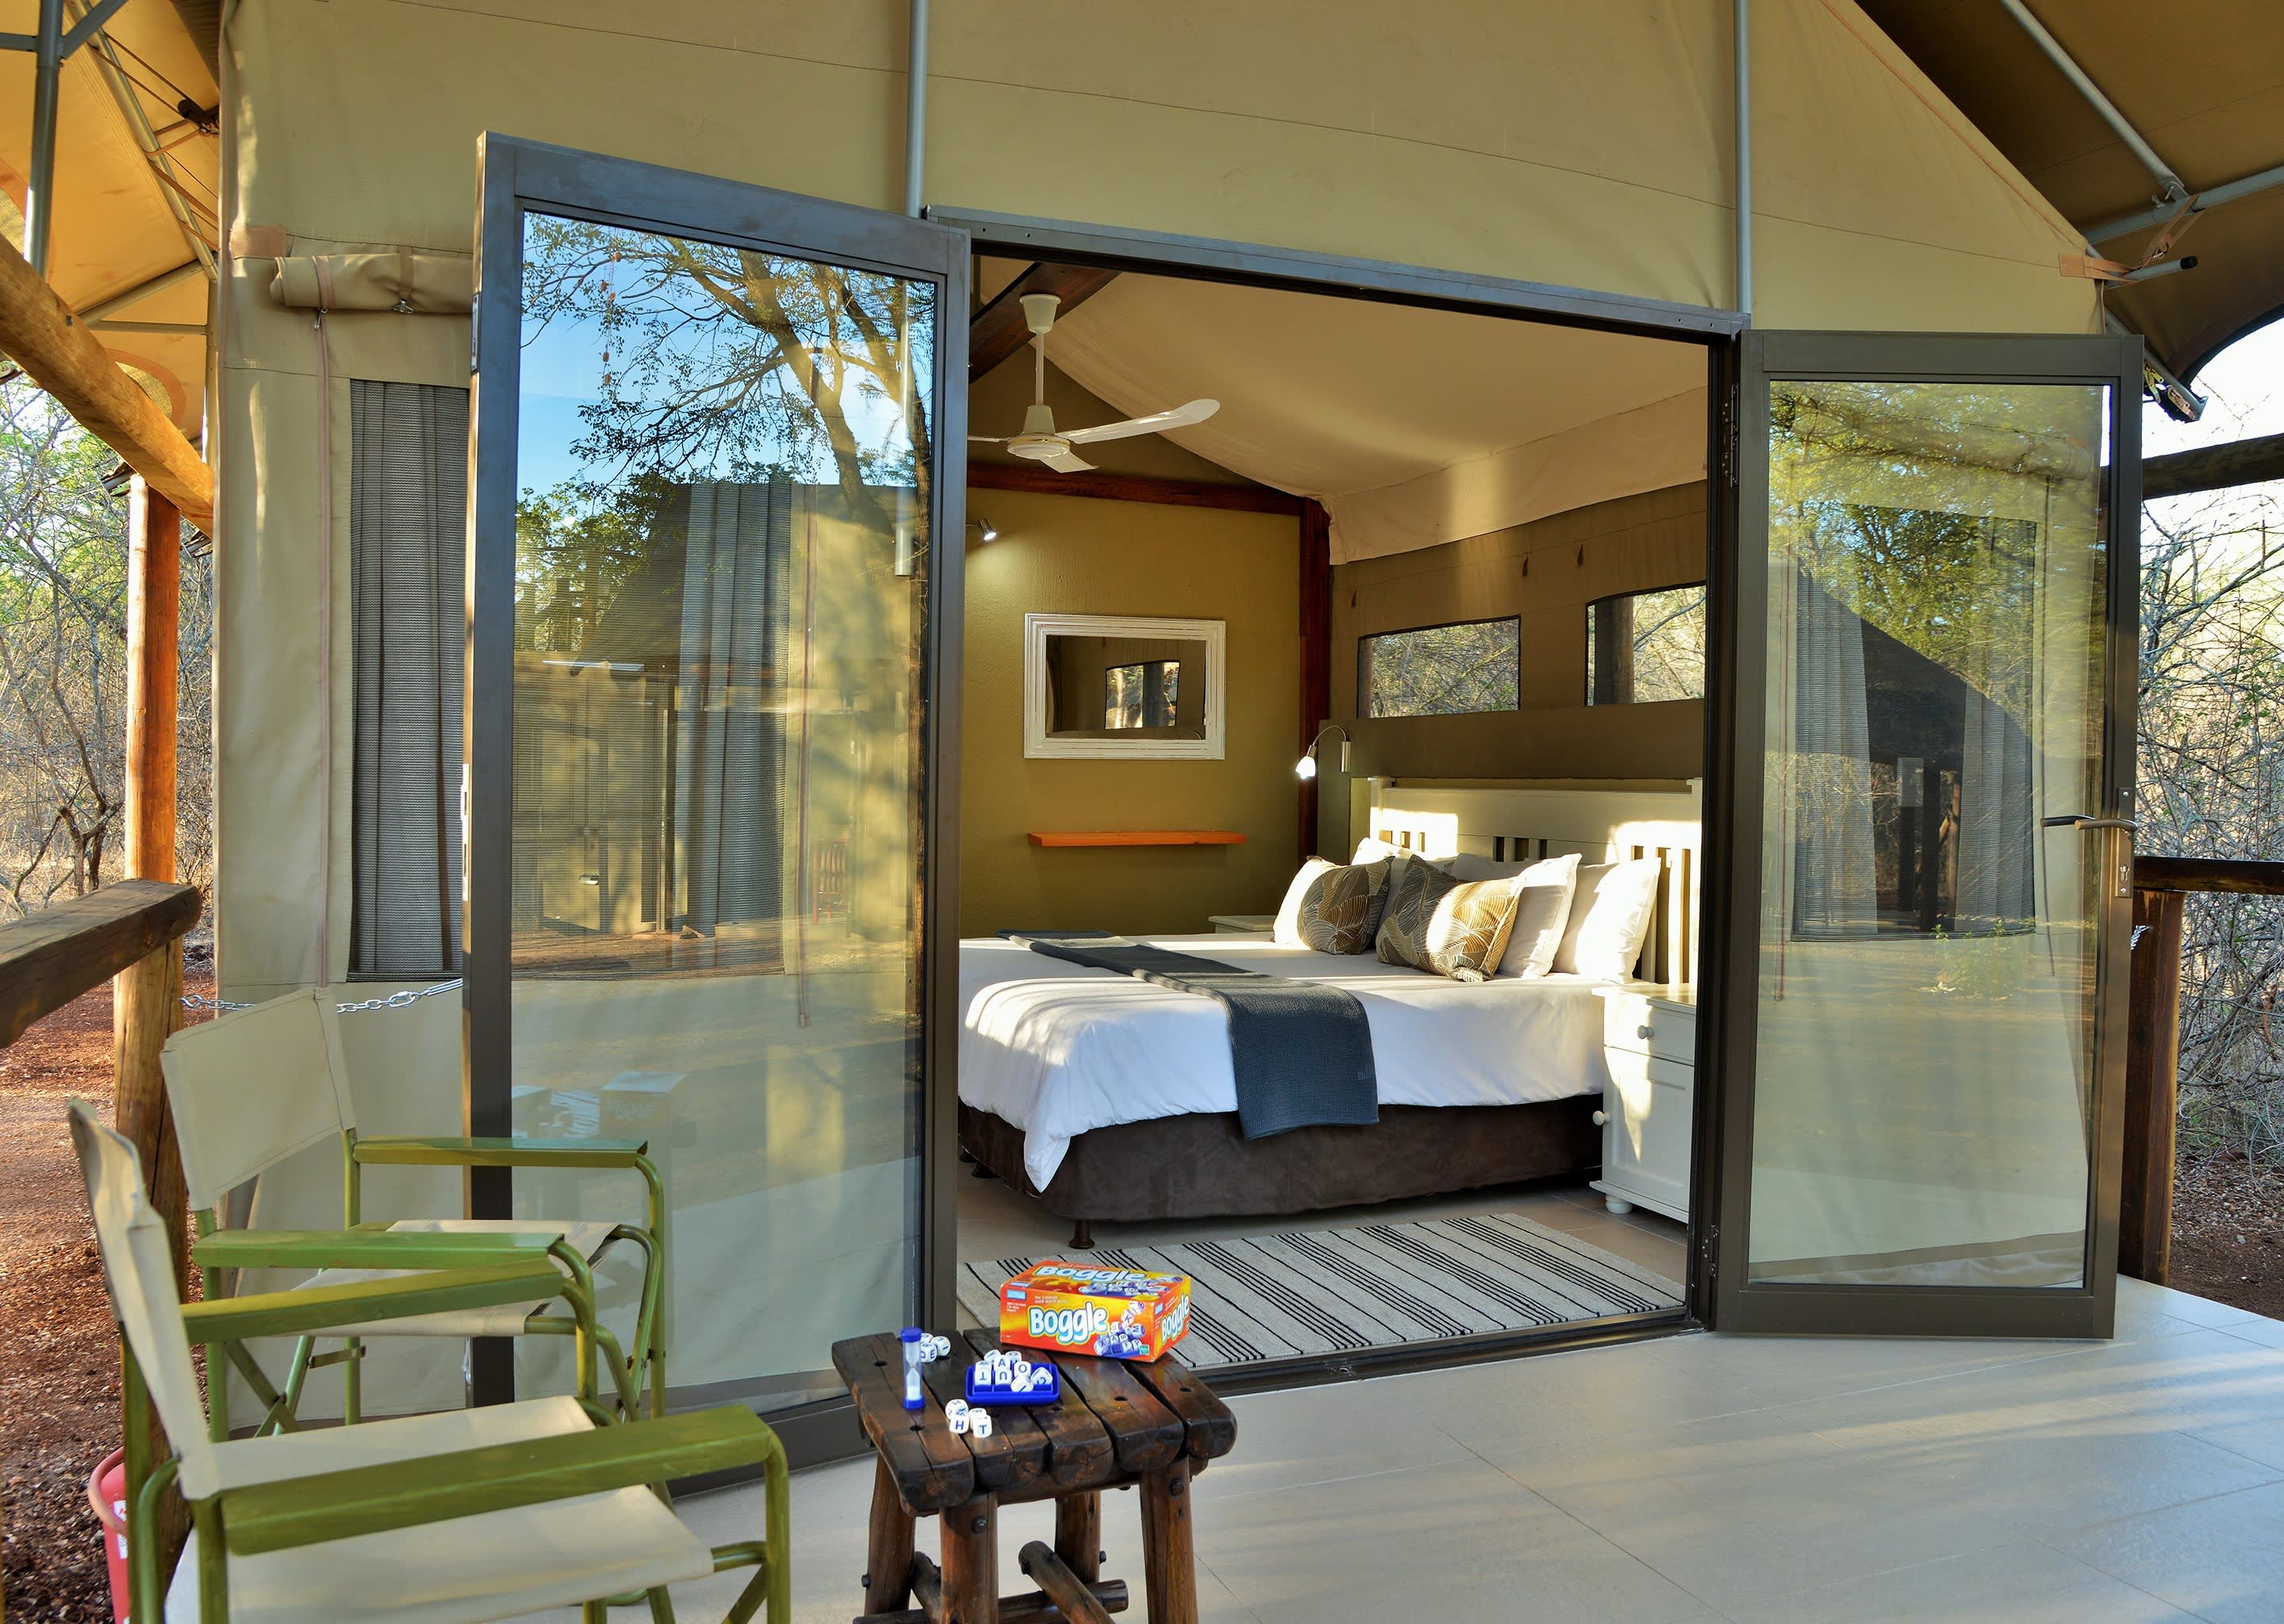 Jackalberry Ridge, Marloth Park near The KNP: Midweek / Weekend Self-Catering Stays for 4/6 people in a Safari Tent!